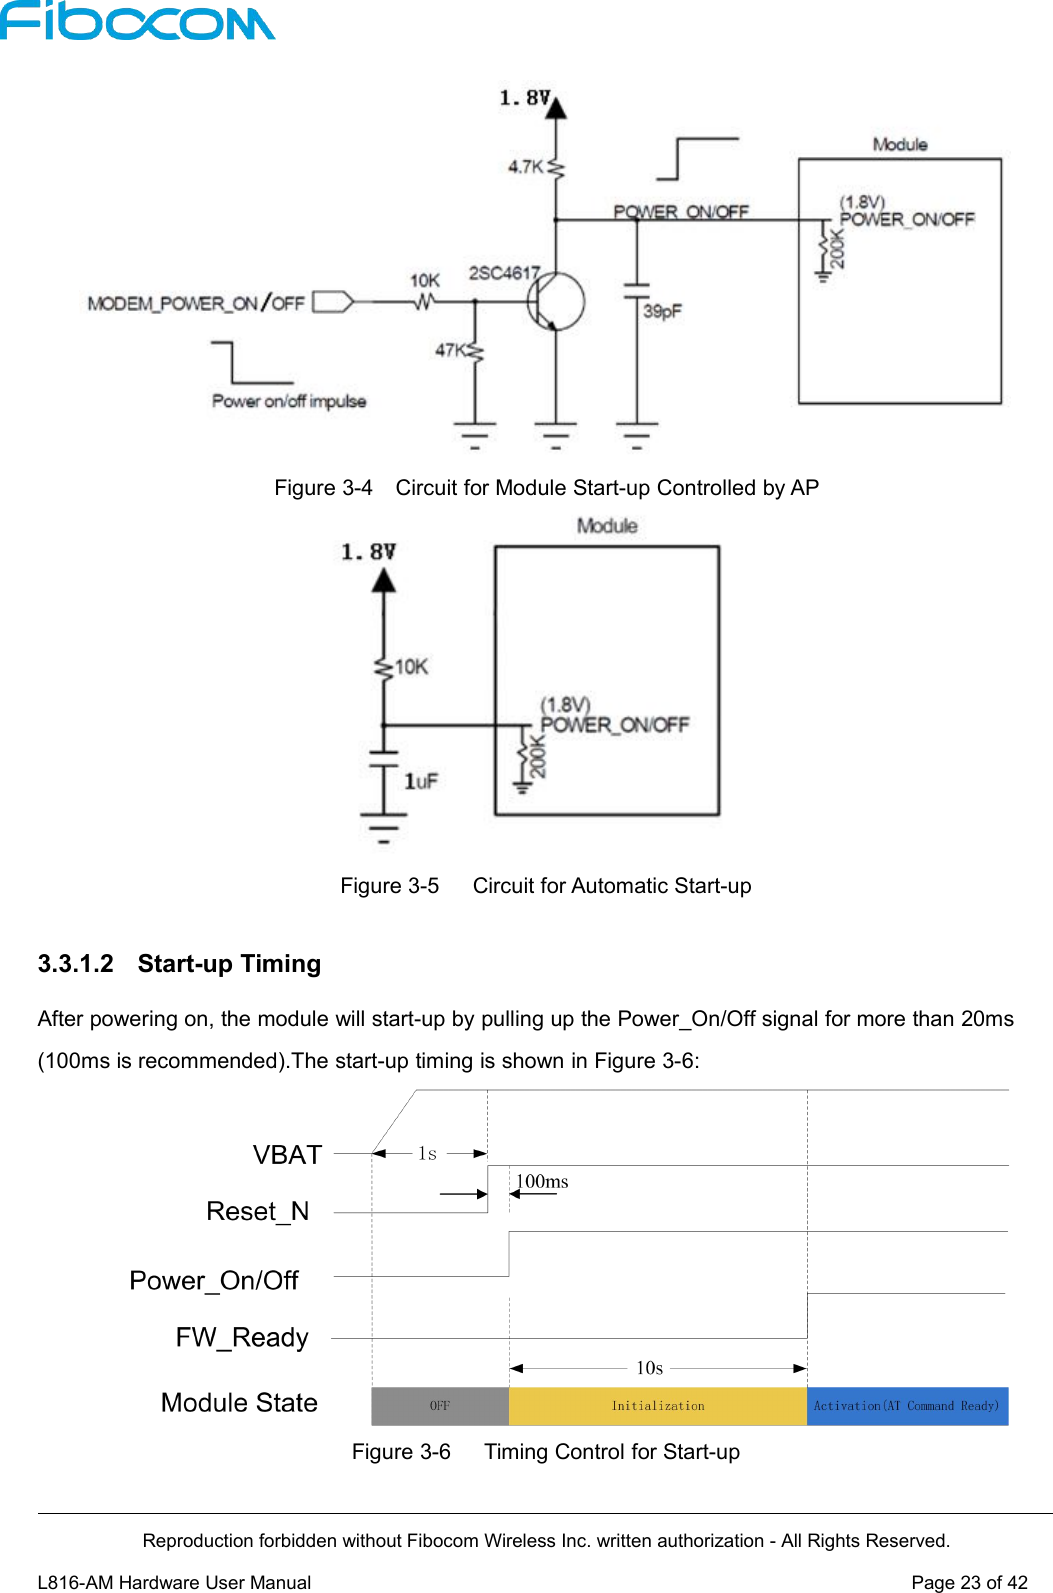 Reproduction forbidden without Fibocom Wireless Inc. written authorization - All Rights Reserved.L816-AM Hardware User Manual Page23of42Figure 3-4 Circuit for Module Start-up Controlled by APFigure 3-5 Circuit for Automatic Start-up3.3.1.2 Start-up TimingAfter powering on, the module will start-up by pulling up the Power_On/Off signal for more than 20ms(100ms is recommended).The start-up timing is shown in Figure 3-6:Figure 3-6 Timing Control for Start-up